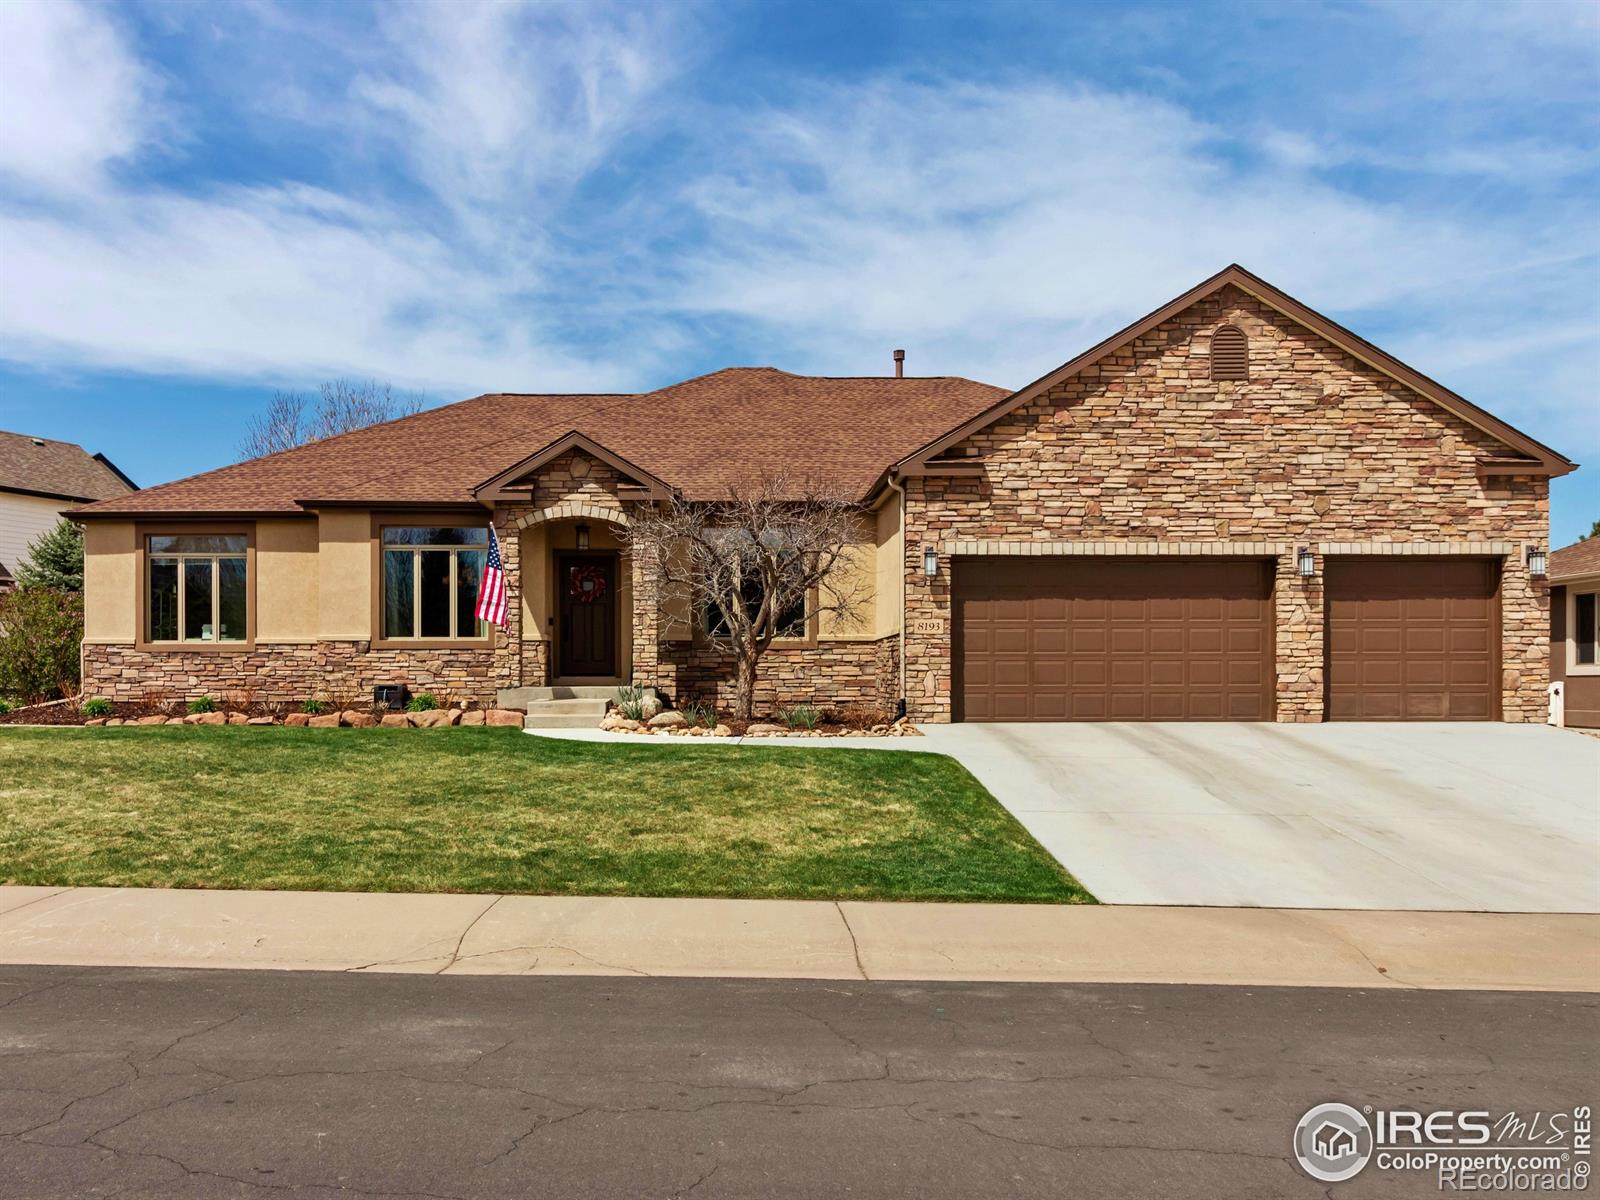 Report Image for 8193  Admiral Drive,Windsor, Colorado